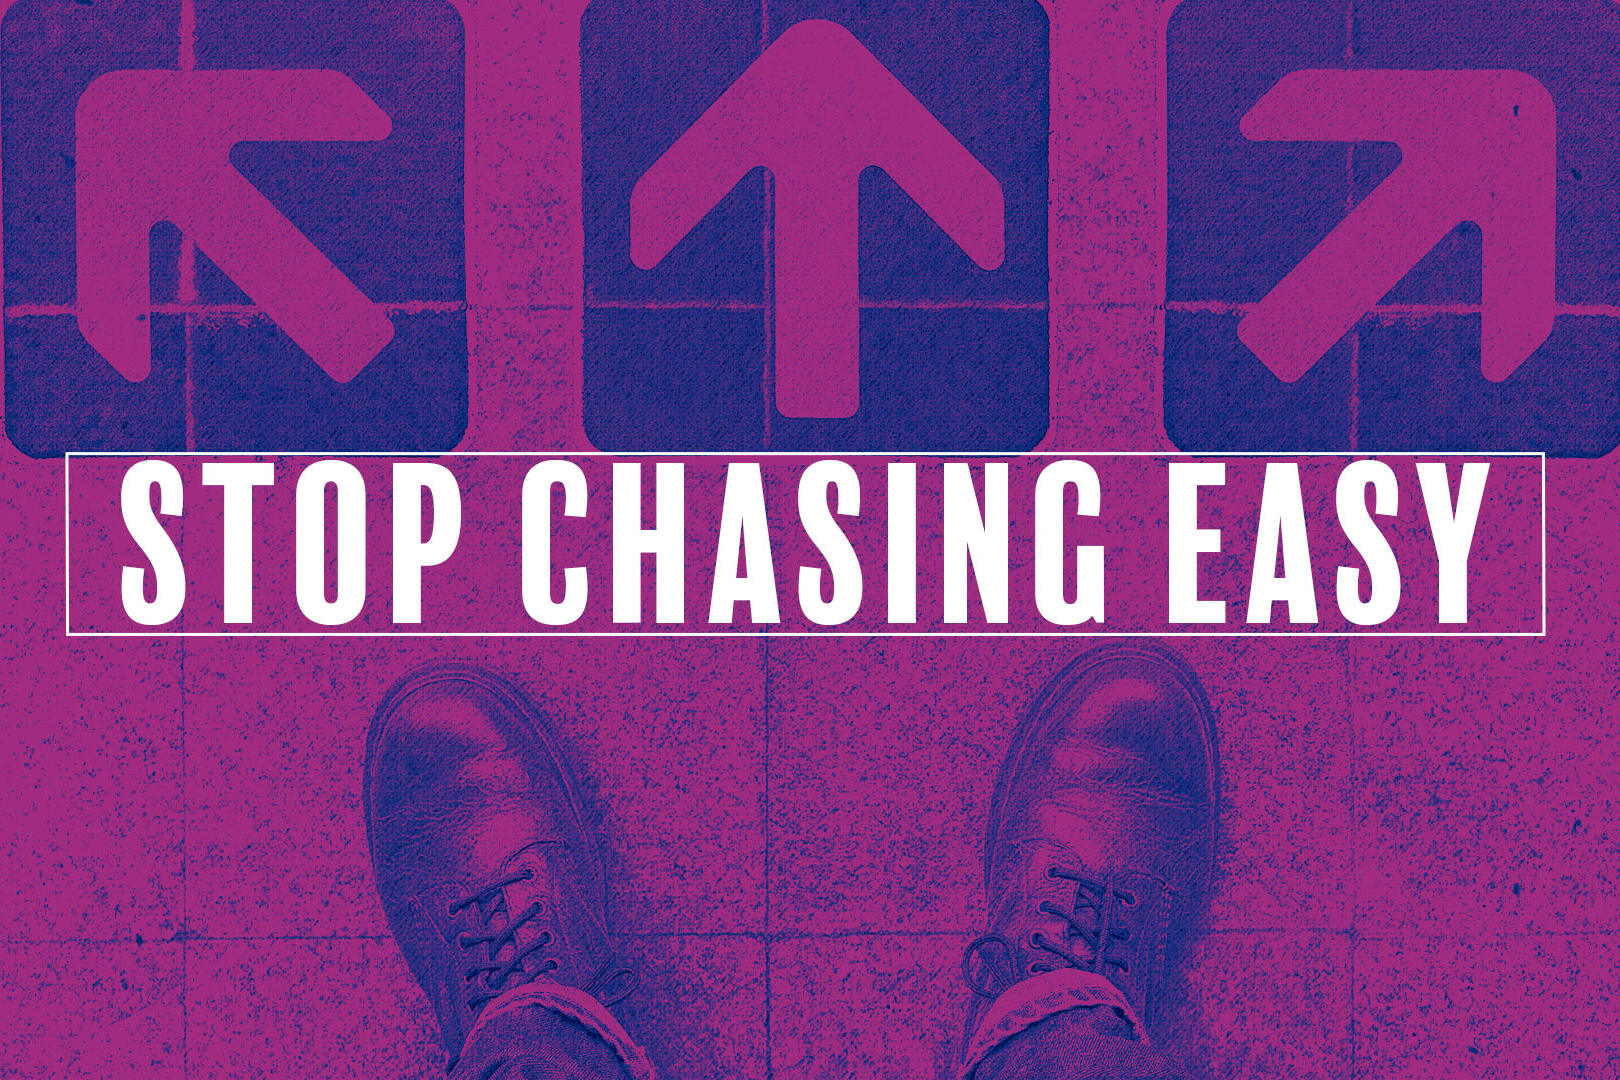 Stop chasing easy